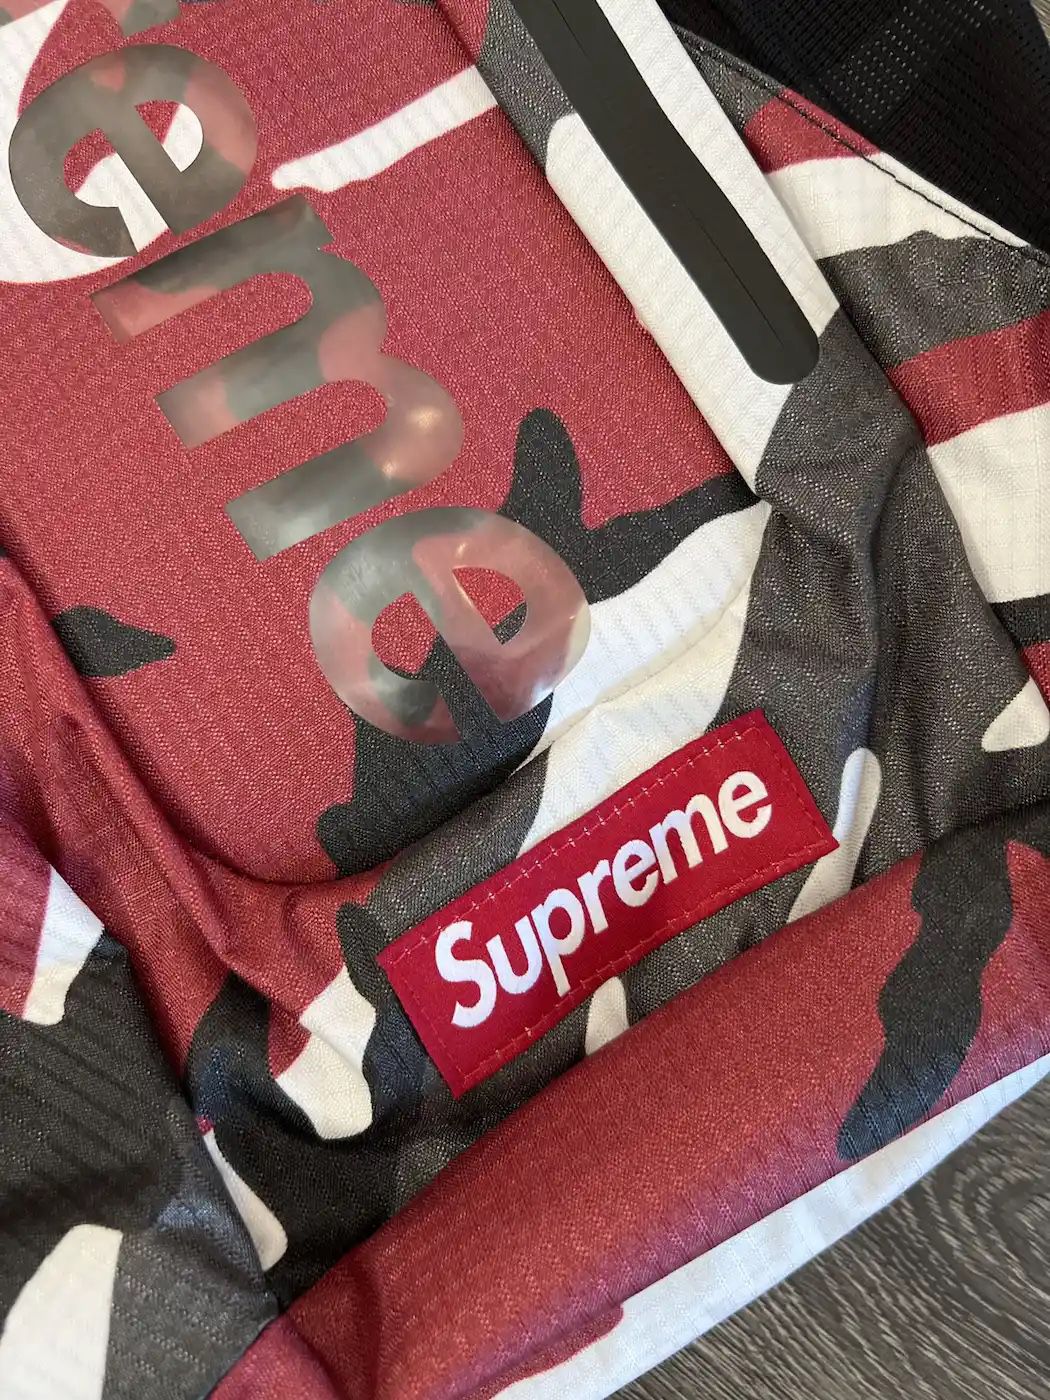 Supreme “Red Camo” Backpack SS21 for Sale in Westchester, CA